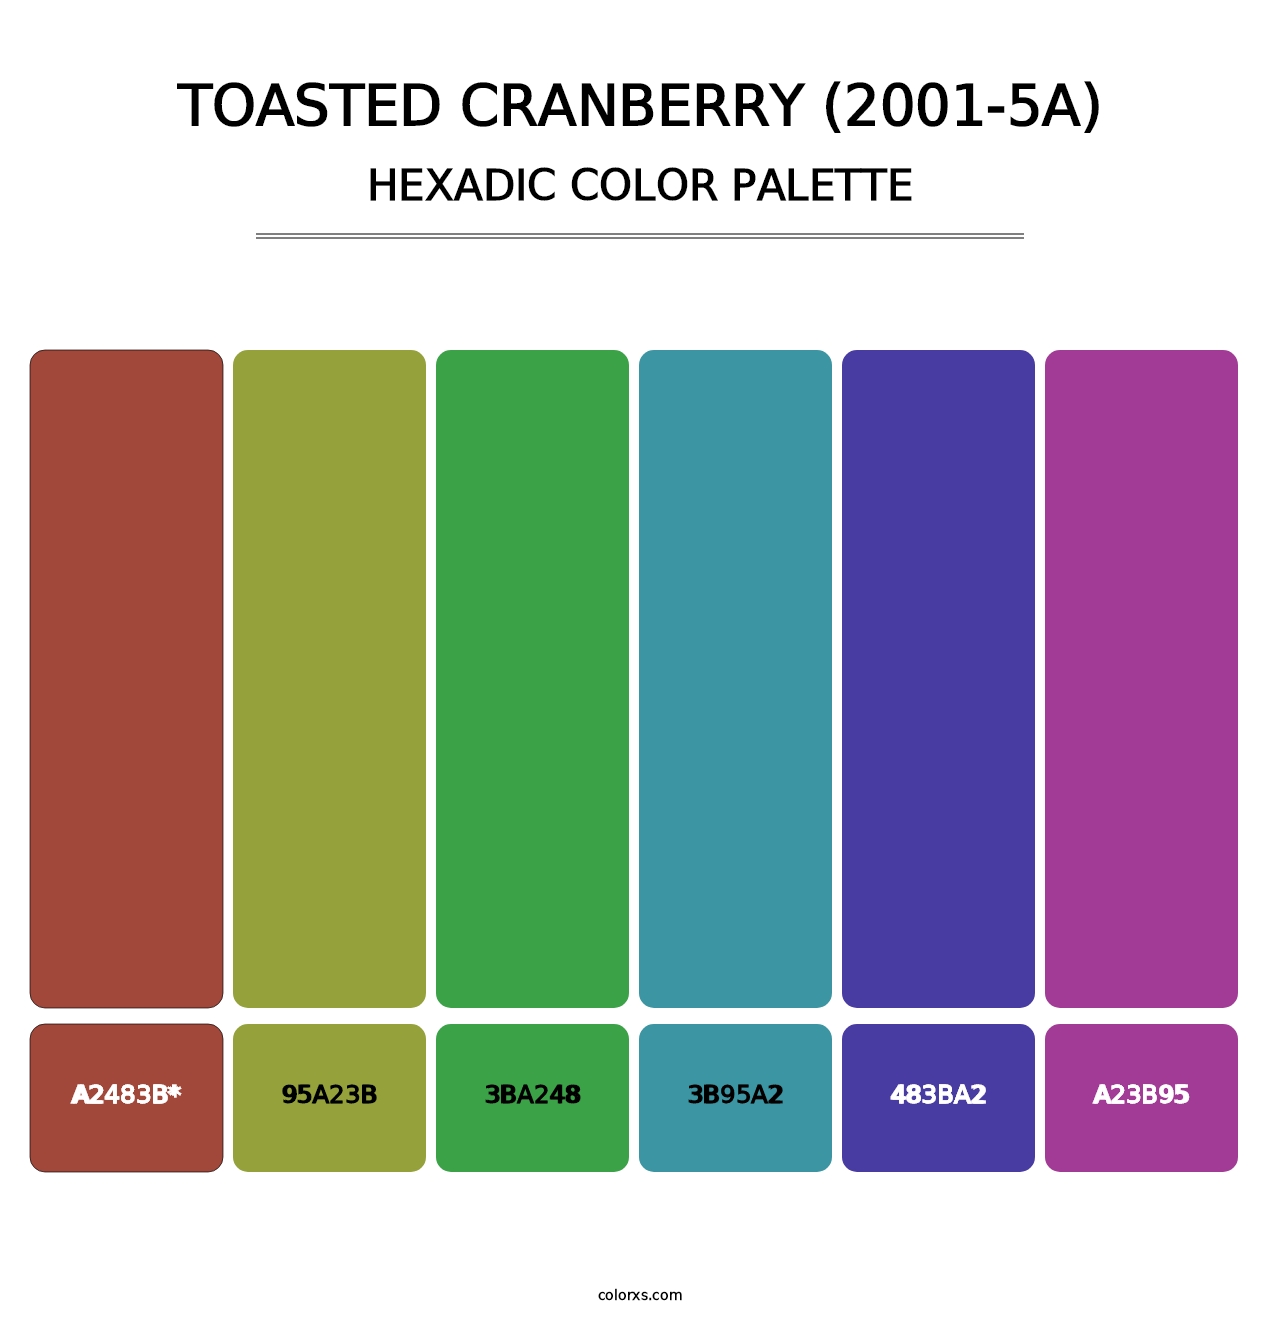 Toasted Cranberry (2001-5A) - Hexadic Color Palette